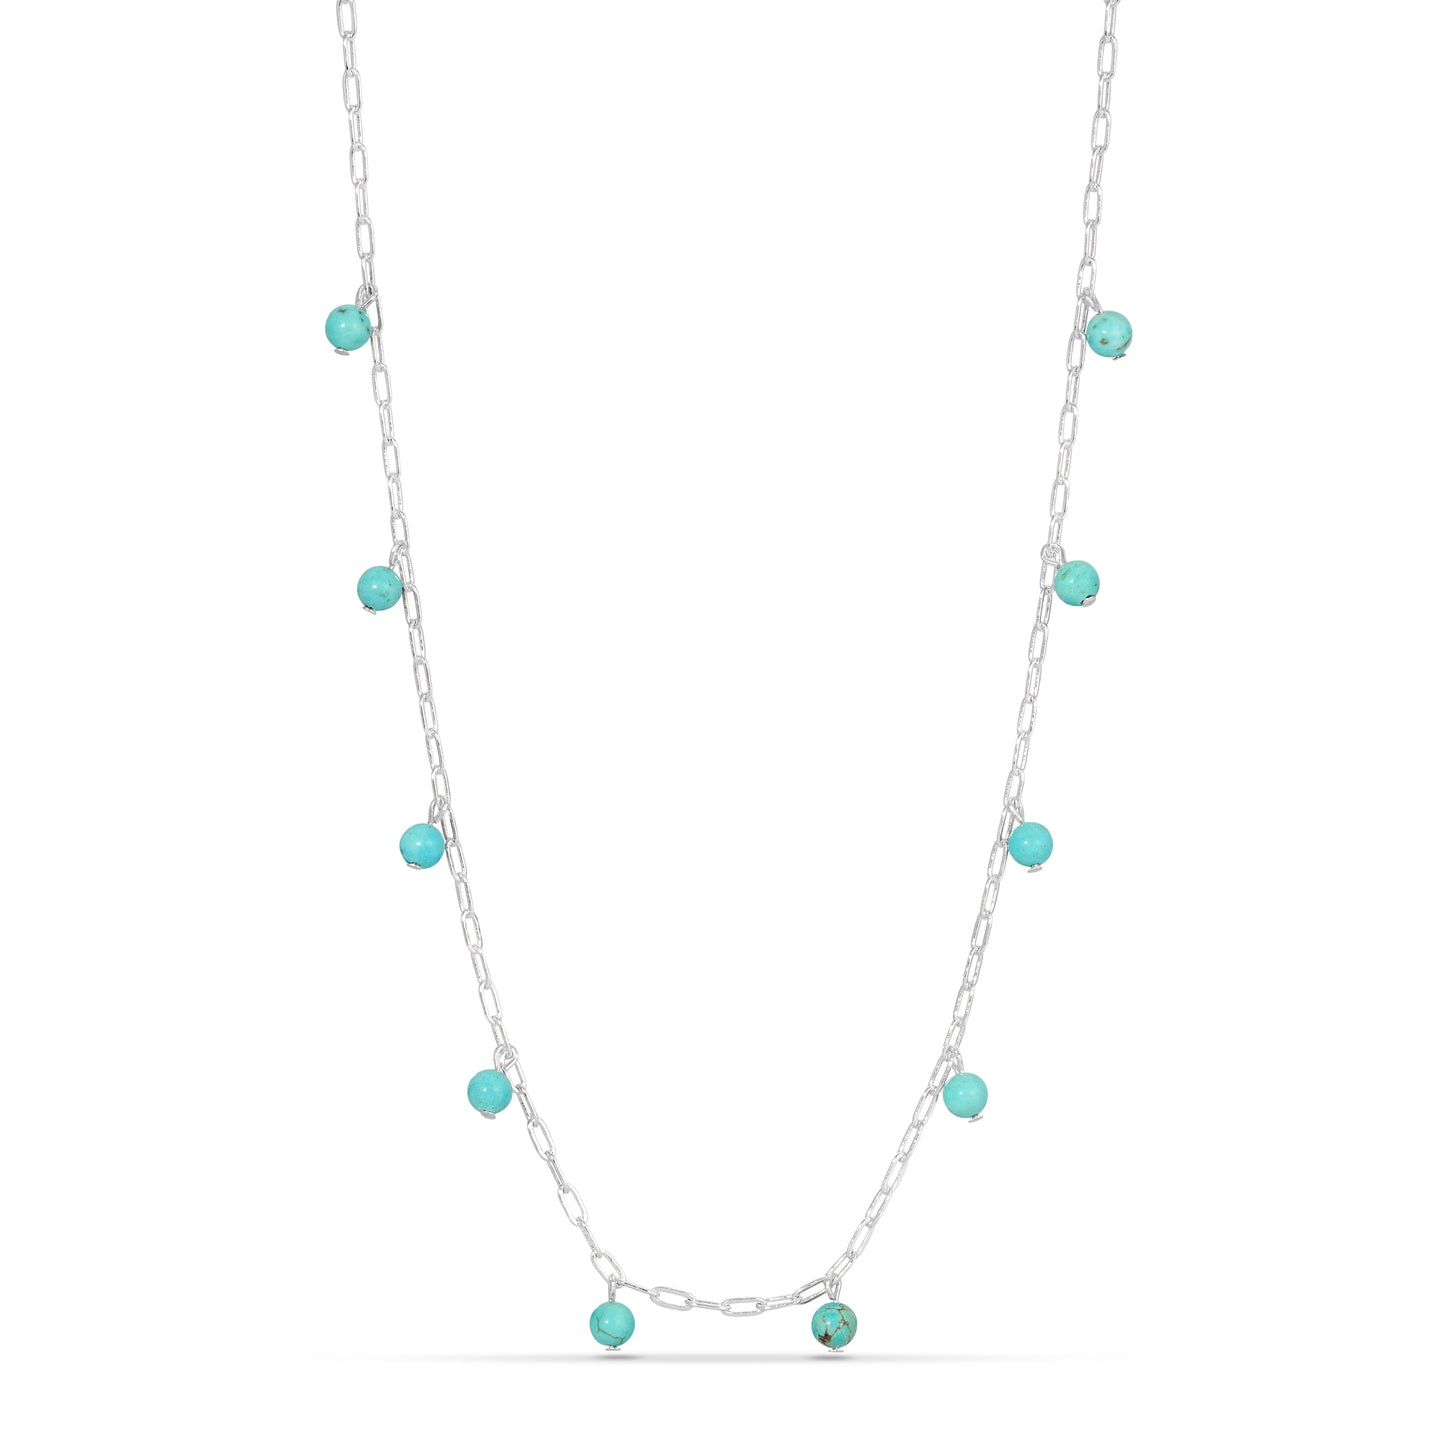 Turquoise howlite petite silver chain necklace